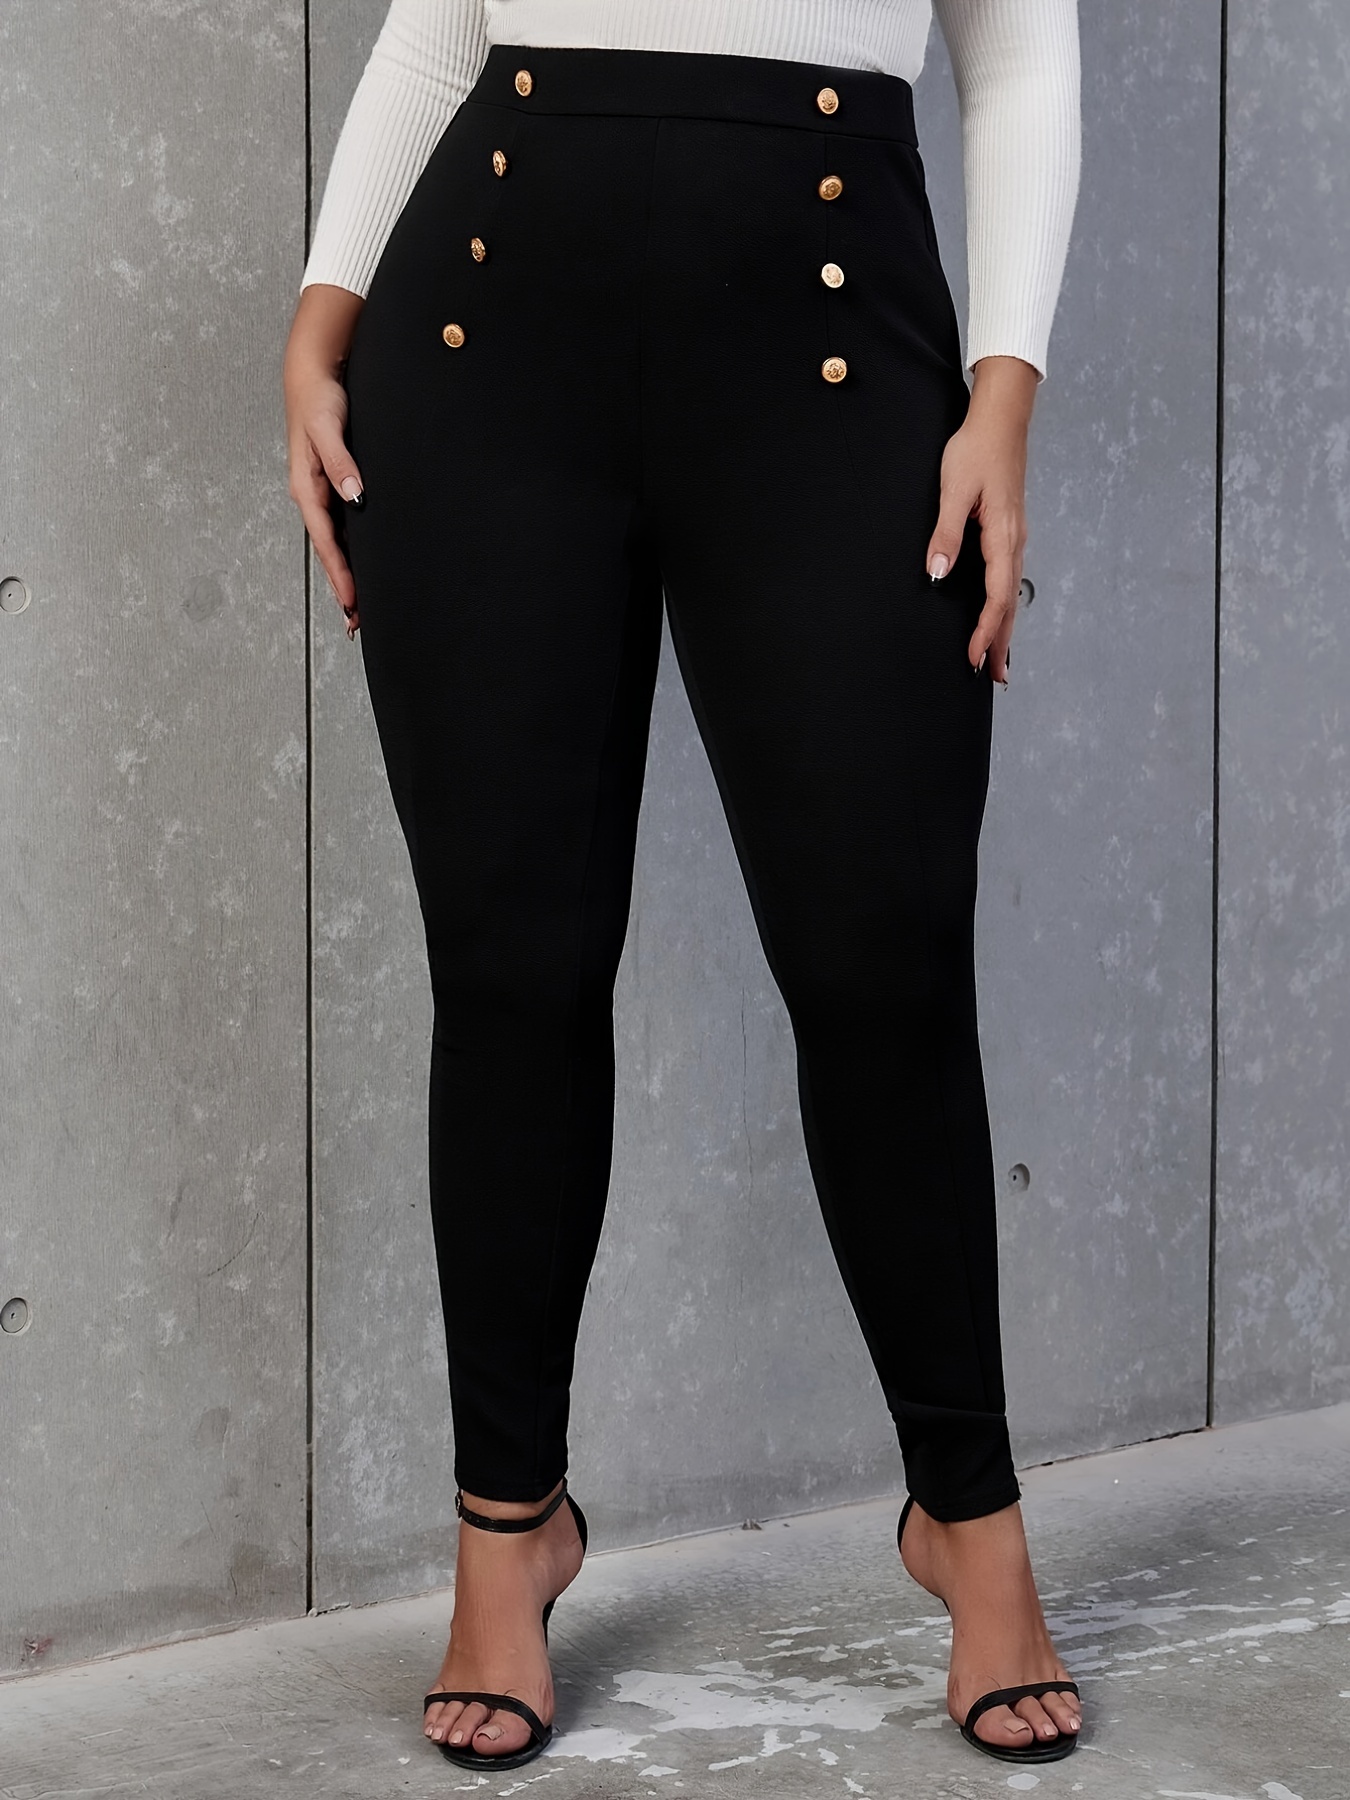 High Waisted Pants For Women, Plus Size